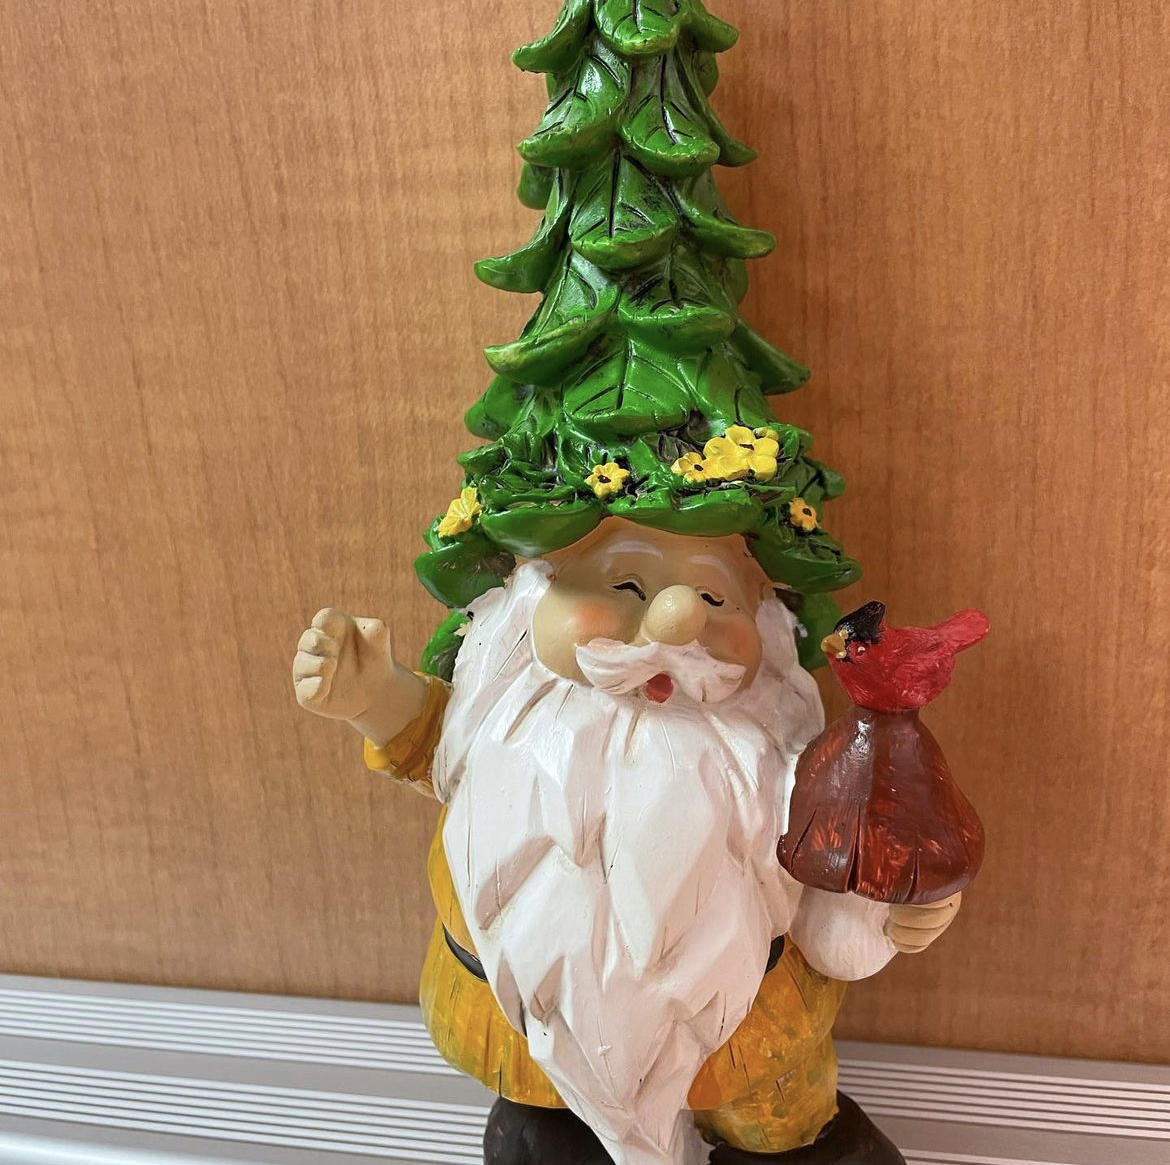 One of the gnomes that is hidden around the school. Returning it to room 32 earns the finder a free ticket to prom.